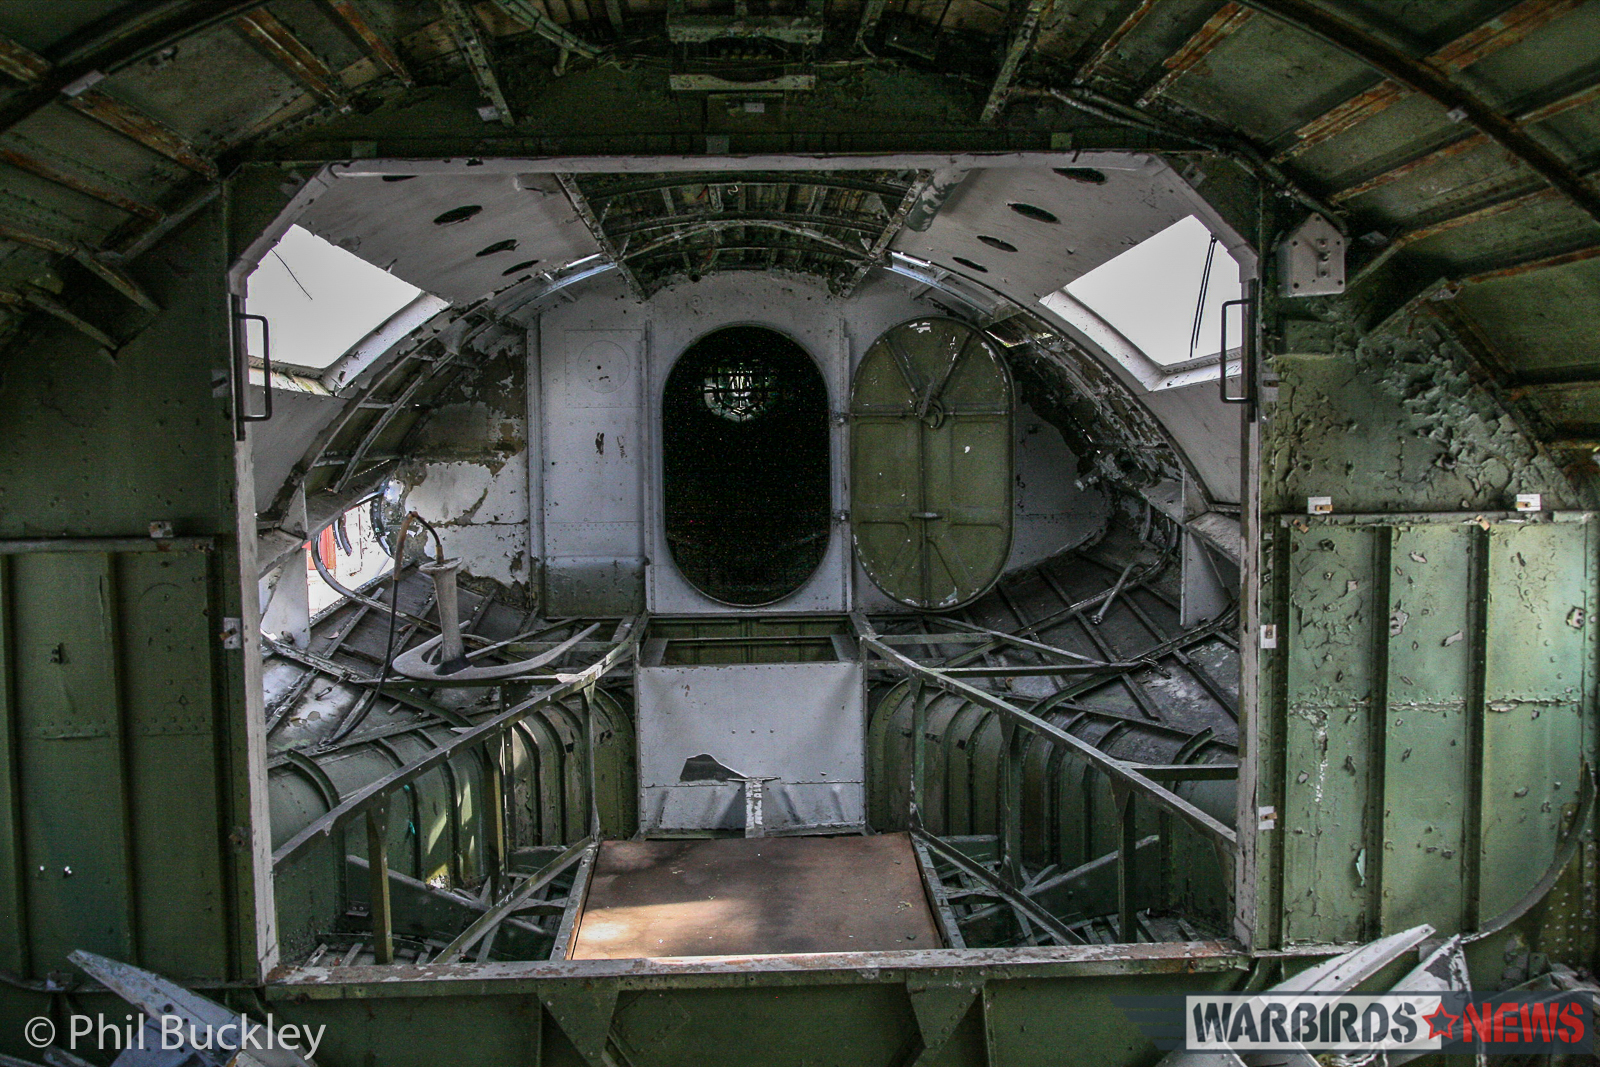 A great view inside the Catalina's waist position. (photo by Phil Buckley)